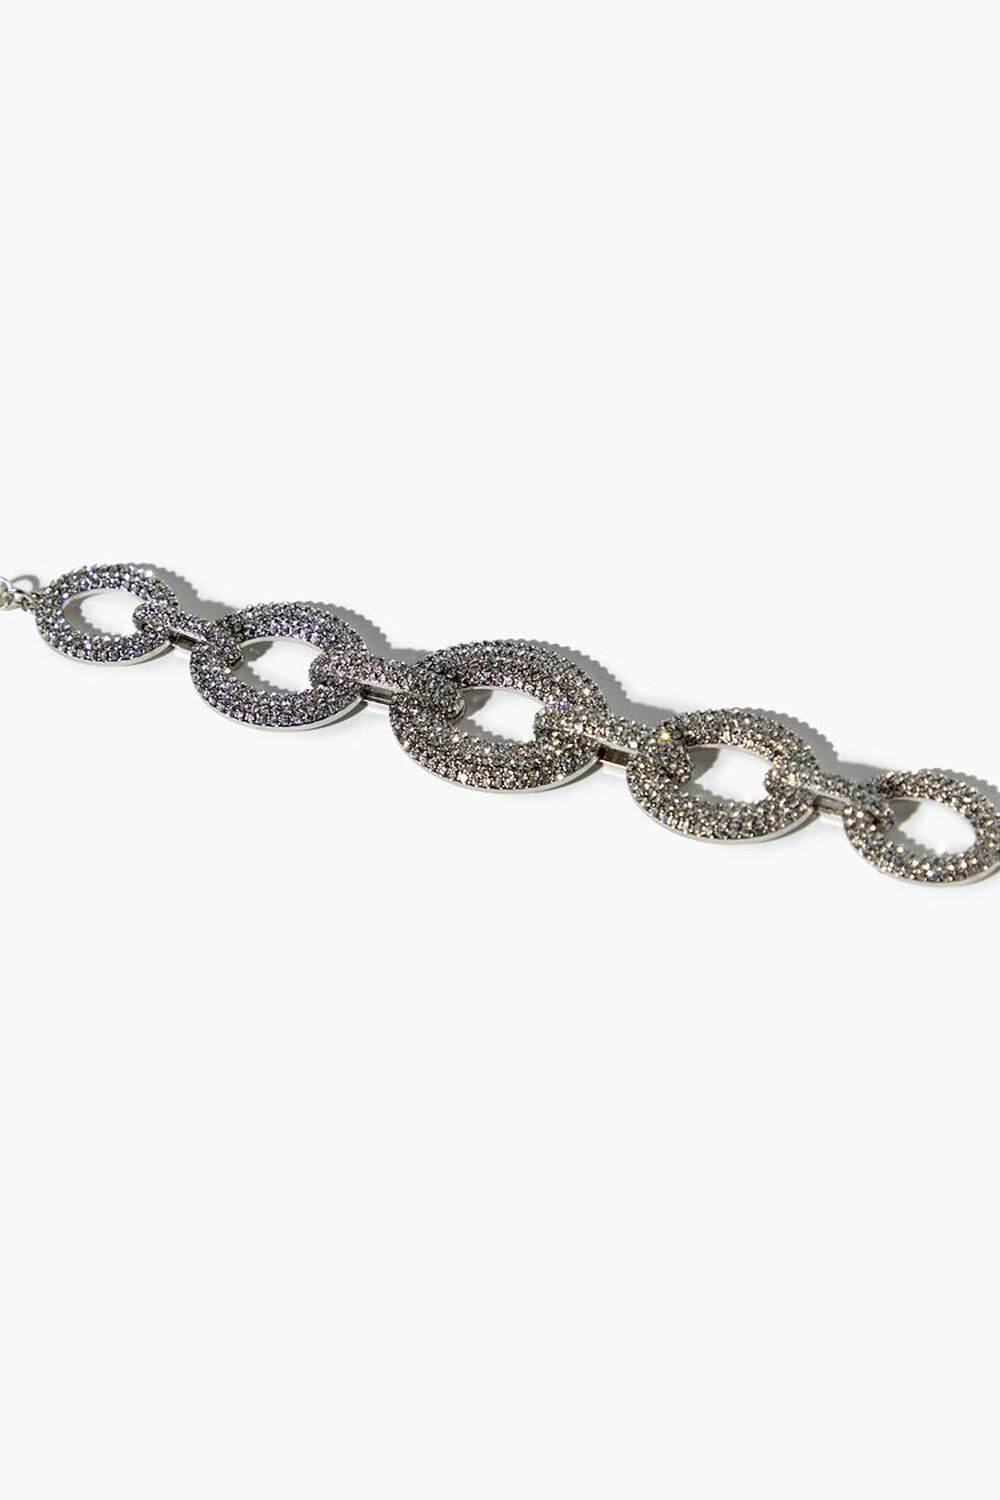 SILVER Rhinestone Chunky Cable Chain Bracelet, image 2